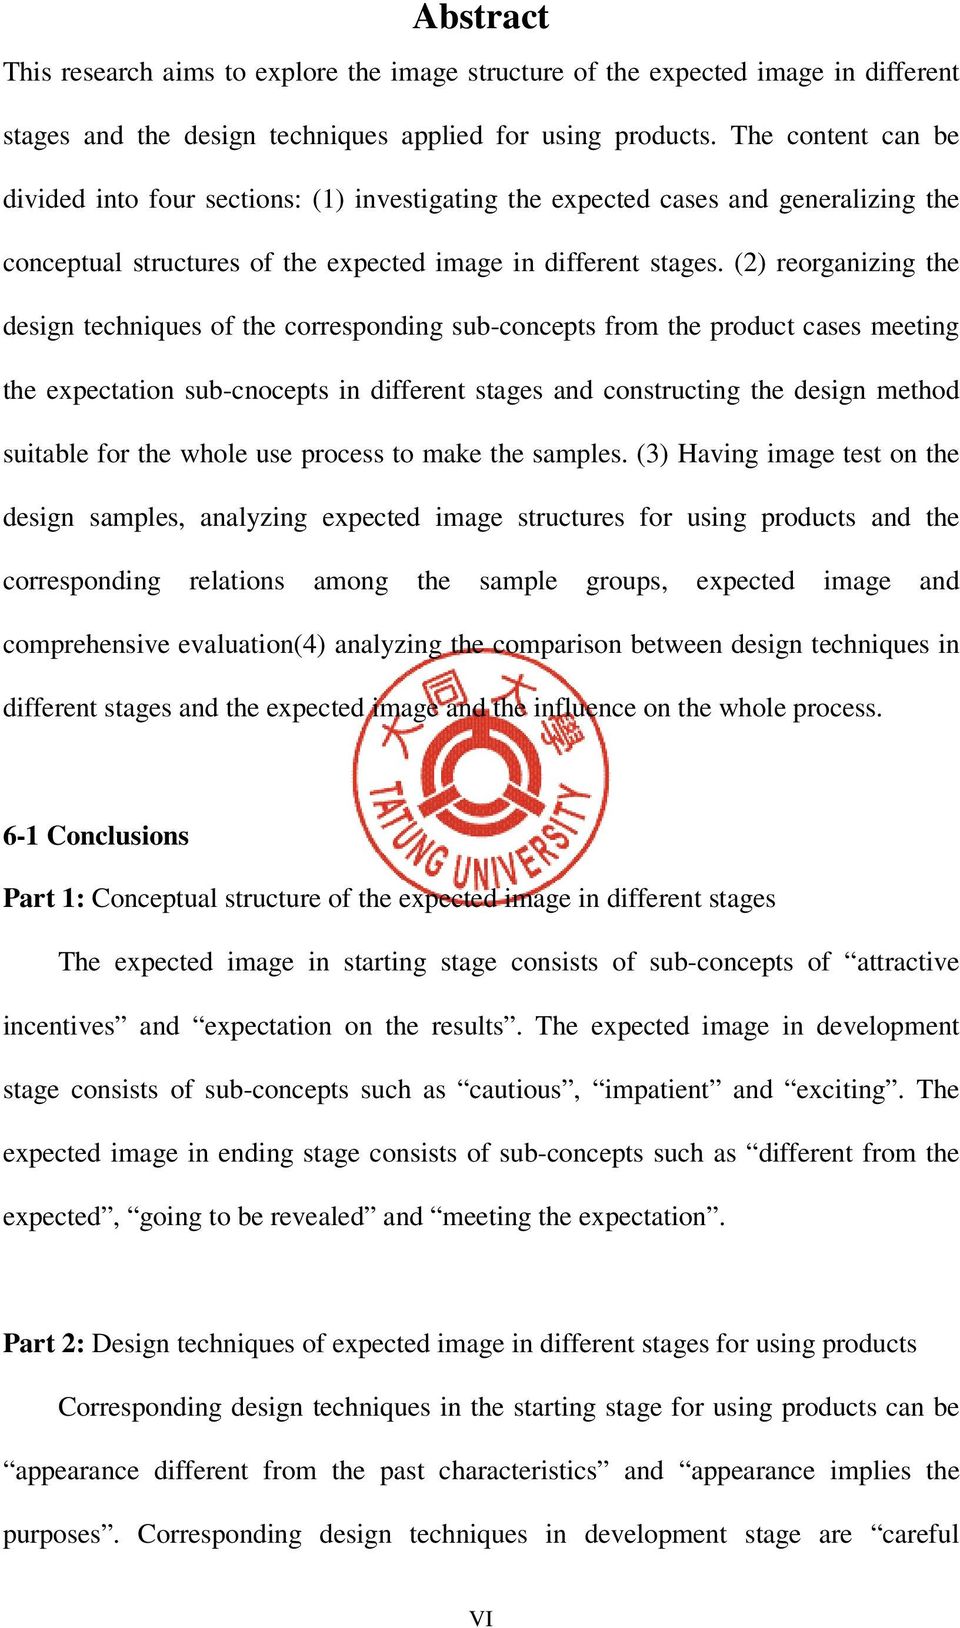 () reorganizing the design techniques of the corresponding sub-concepts from the product cases meeting the expectation sub-cnocepts in different stages and constructing the design method suitable for